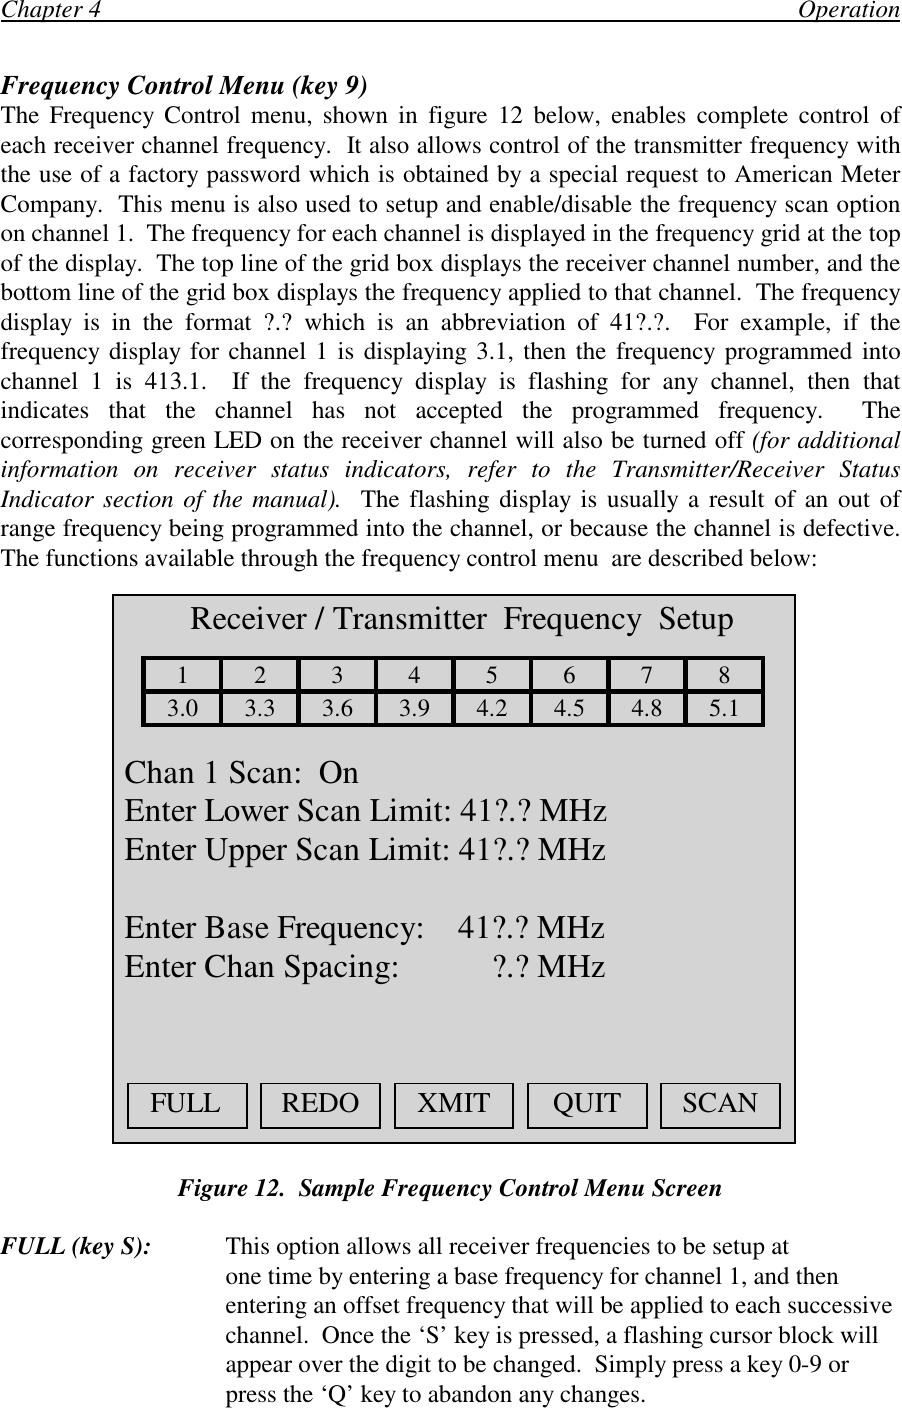 Chapter 4                                                                                                                OperationFrequency Control Menu (key 9)The Frequency Control menu, shown in figure 12 below, enables complete control ofeach receiver channel frequency.  It also allows control of the transmitter frequency withthe use of a factory password which is obtained by a special request to American MeterCompany.  This menu is also used to setup and enable/disable the frequency scan optionon channel 1.  The frequency for each channel is displayed in the frequency grid at the topof the display.  The top line of the grid box displays the receiver channel number, and thebottom line of the grid box displays the frequency applied to that channel.  The frequencydisplay is in the format ?.? which is an abbreviation of 41?.?.  For example, if thefrequency display for channel 1 is displaying 3.1, then the frequency programmed intochannel 1 is 413.1.  If the frequency display is flashing for any channel, then thatindicates that the channel has not accepted the programmed frequency.  Thecorresponding green LED on the receiver channel will also be turned off (for additionalinformation on receiver status indicators, refer to the Transmitter/Receiver StatusIndicator section of the manual).  The flashing display is usually a result of an out ofrange frequency being programmed into the channel, or because the channel is defective.The functions available through the frequency control menu  are described below:Figure 12.  Sample Frequency Control Menu ScreenFULL (key S): This option allows all receiver frequencies to be setup atone time by entering a base frequency for channel 1, and thenentering an offset frequency that will be applied to each successivechannel.  Once the ‘S’ key is pressed, a flashing cursor block willappear over the digit to be changed.  Simply press a key 0-9 orpress the ‘Q’ key to abandon any changes.  Receiver / Transmitter  Frequency  Setup123456783.0 3.3 3.6 3.9 4.2 4.5 4.8 5.1 Chan 1 Scan:  On Enter Lower Scan Limit: 41?.? MHz Enter Upper Scan Limit: 41?.? MHz Enter Base Frequency:    41?.? MHz Enter Chan Spacing:           ?.? MHzFULL REDO XMIT QUIT SCAN